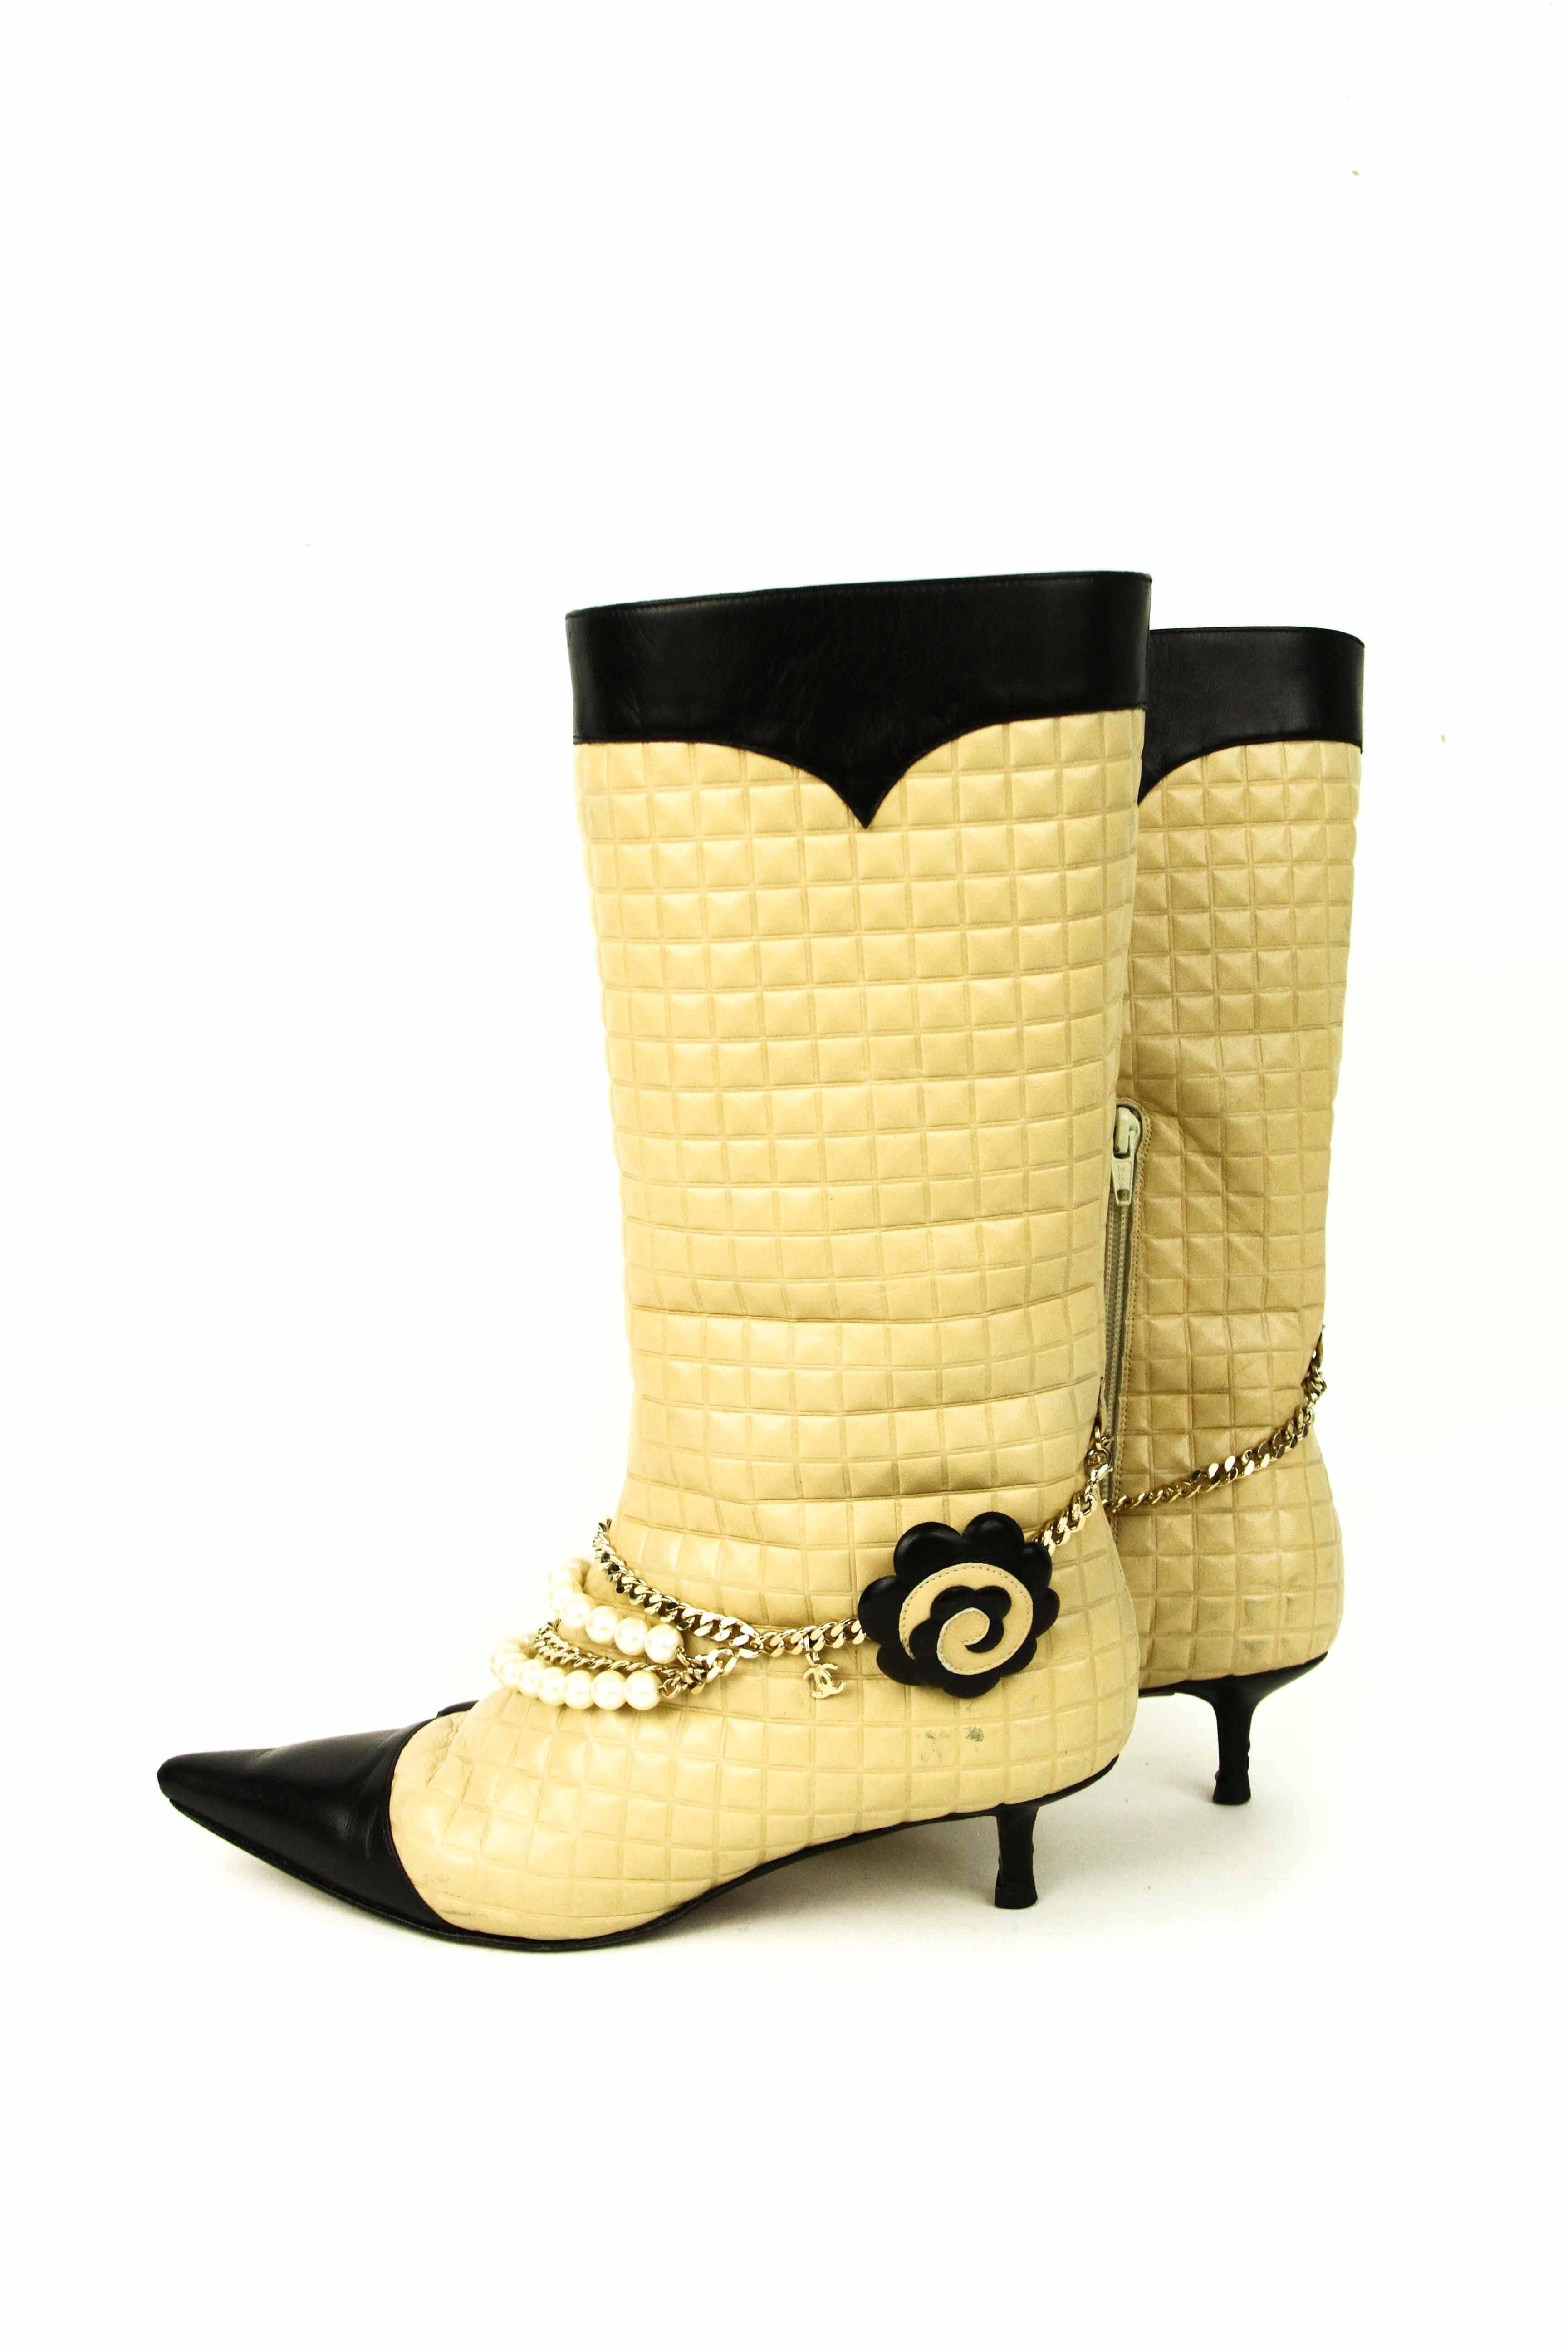 CHANEL Quilted Boot with Pearls and Camellia Flower 39.5 5